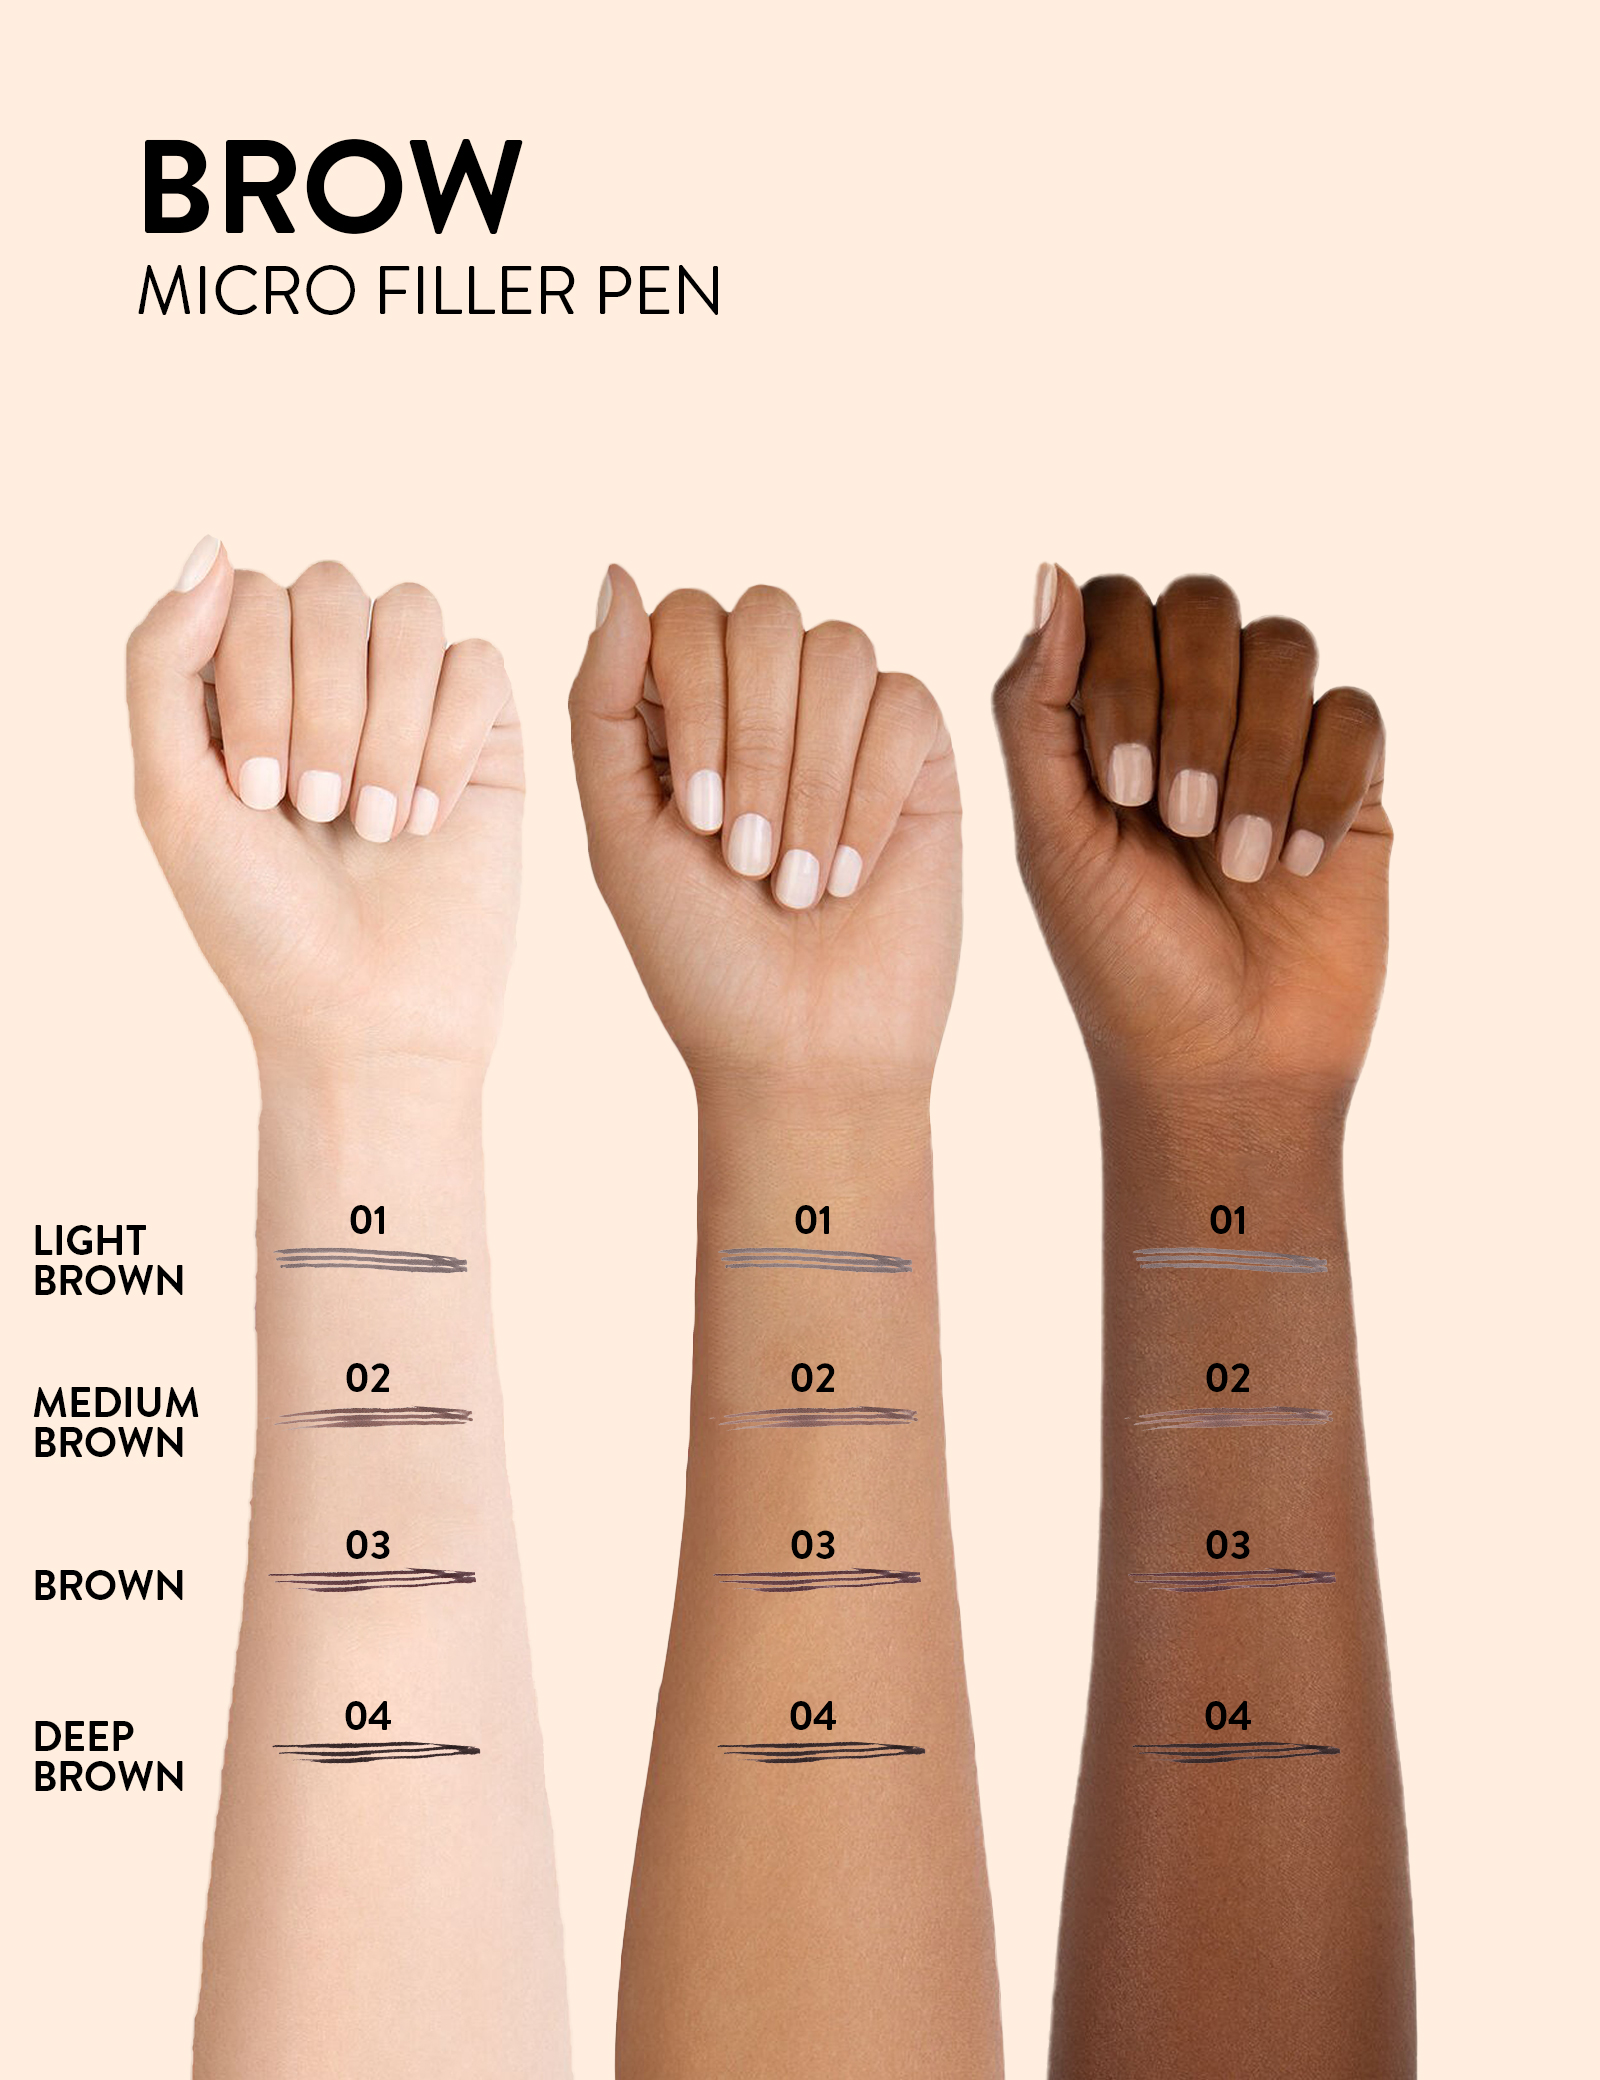 New Micro Eyebrow Filler Pencil - Light Brown 01 from Flormar